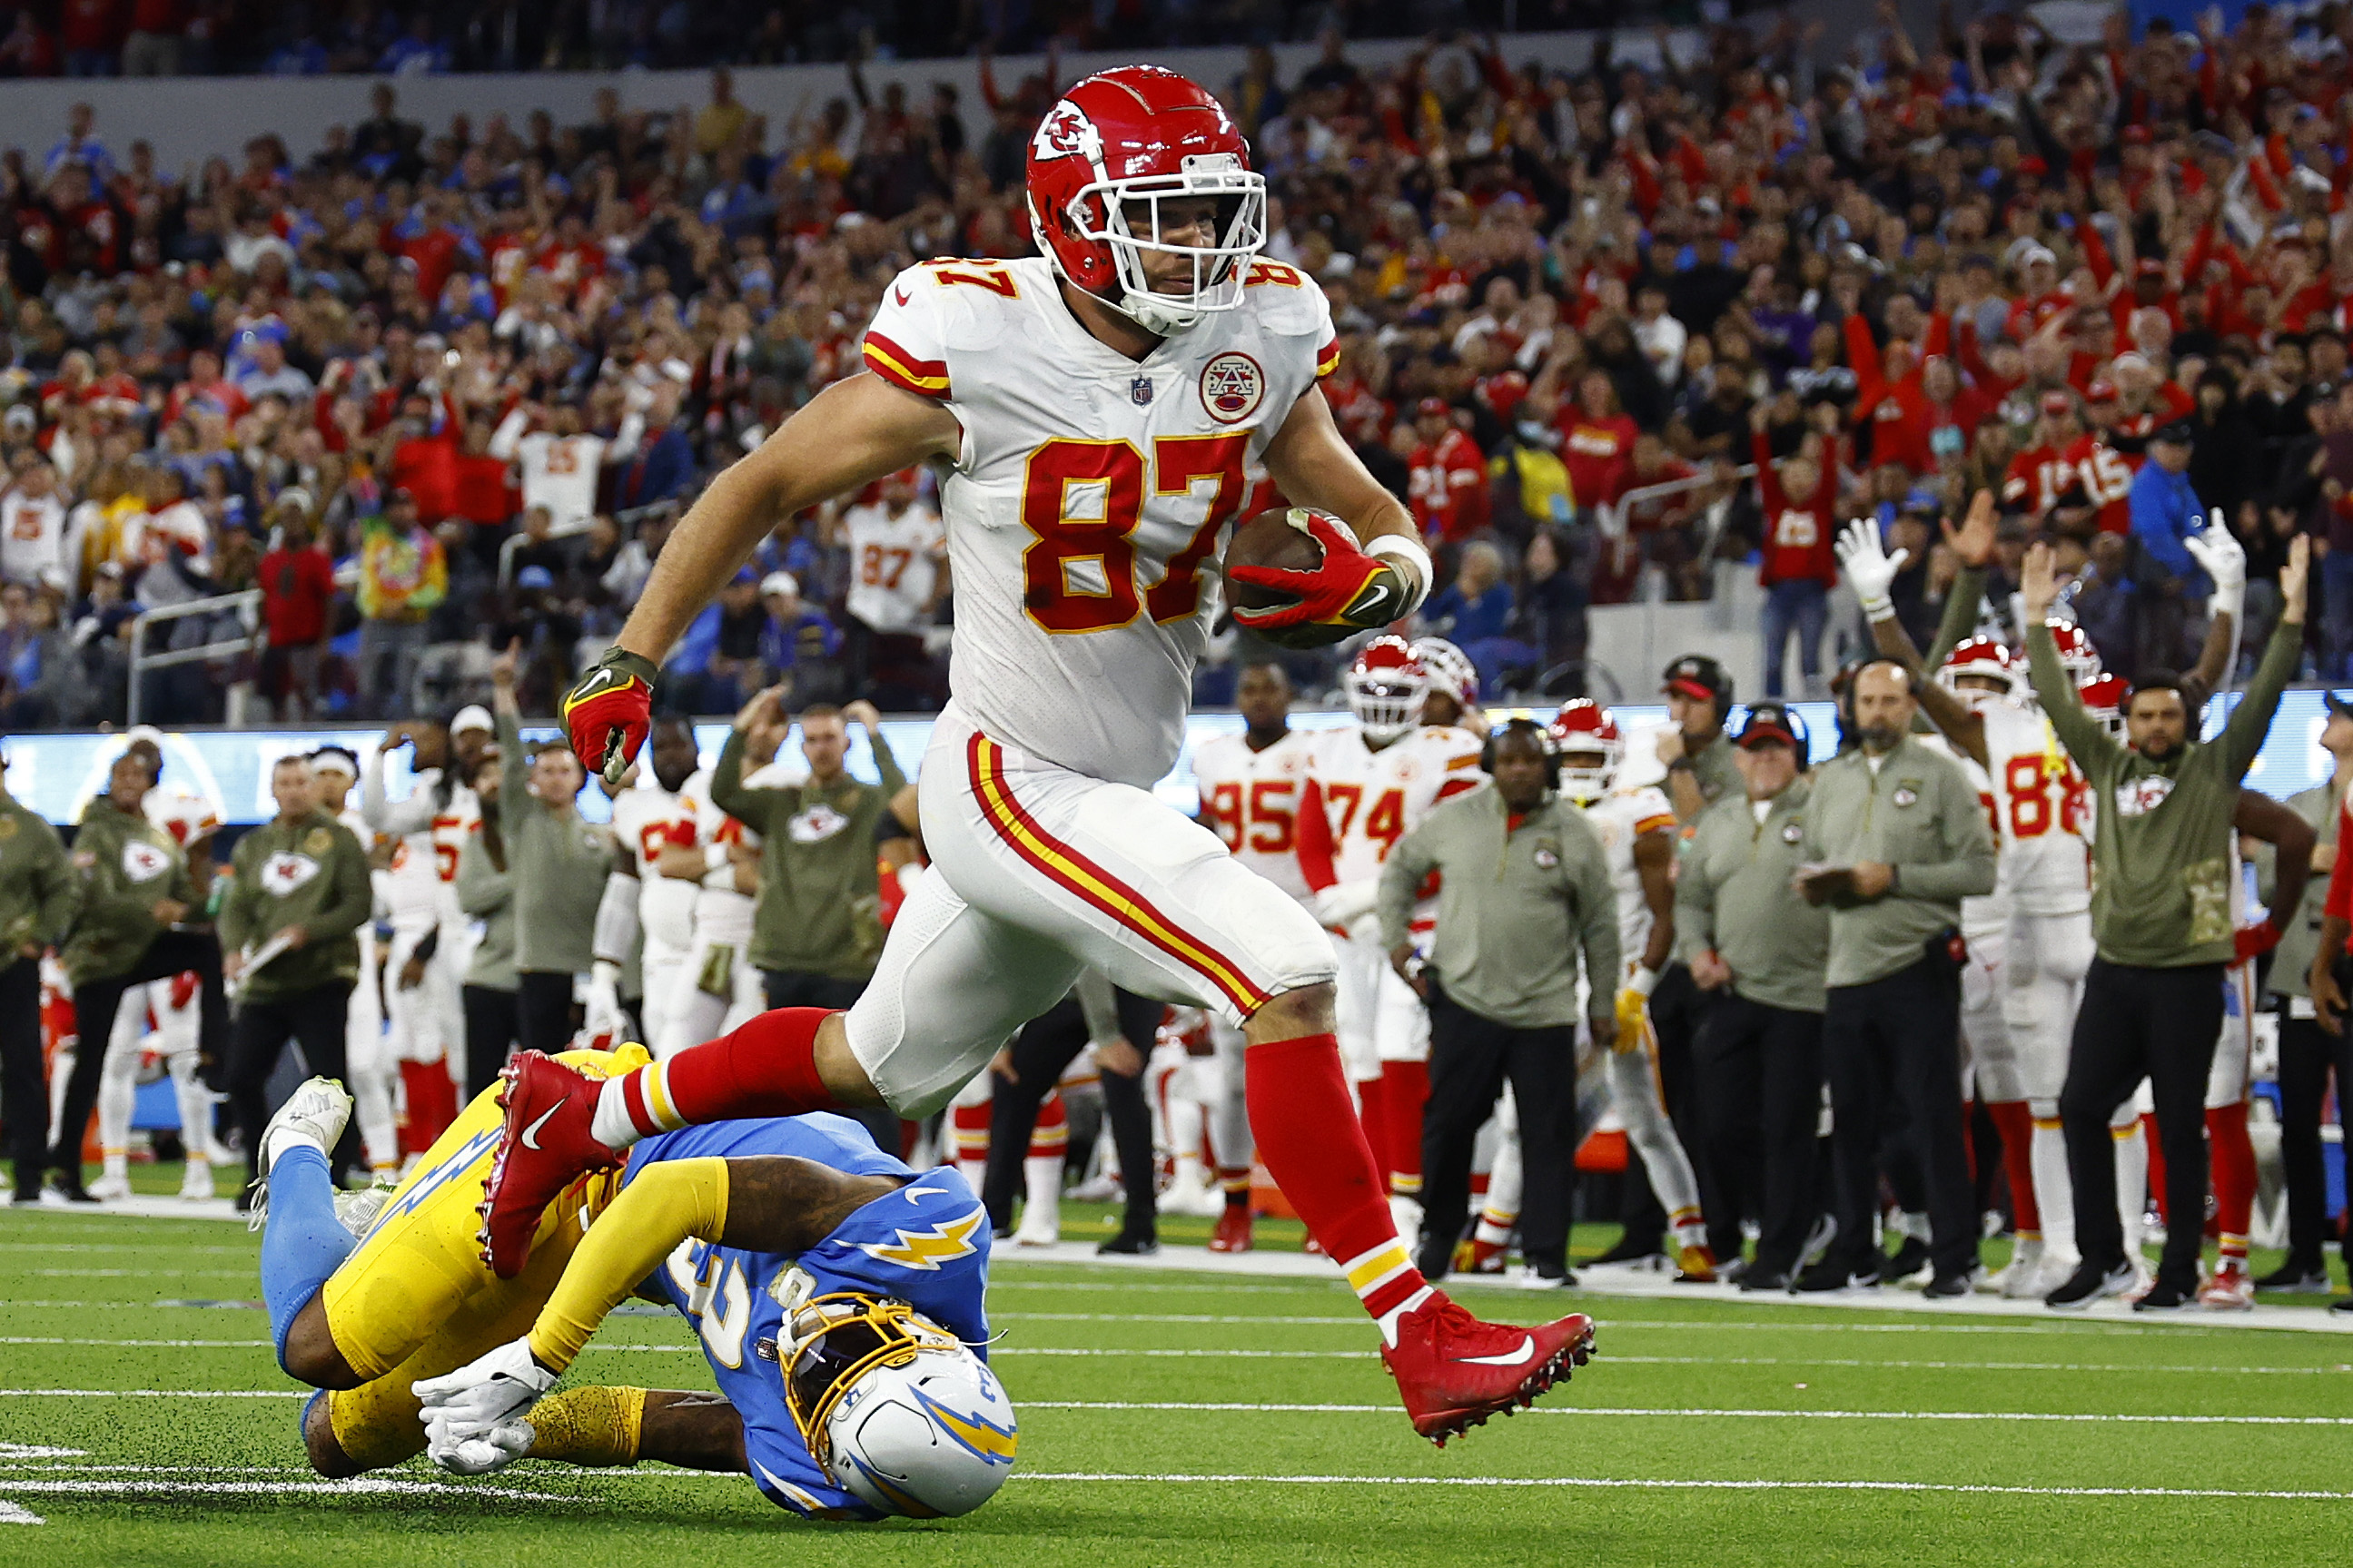 INGLEWOOD, CALIFORNIA - NOVEMBER 20: Travis Kelce #87 of the Kansas City Chiefs scores a touchdown during the fourth quarter in the game against the Los Angles Chargers at SoFi Stadium on November 20, 2022 in Inglewood, California. (Photo by Ronald Martinez/Getty Images)